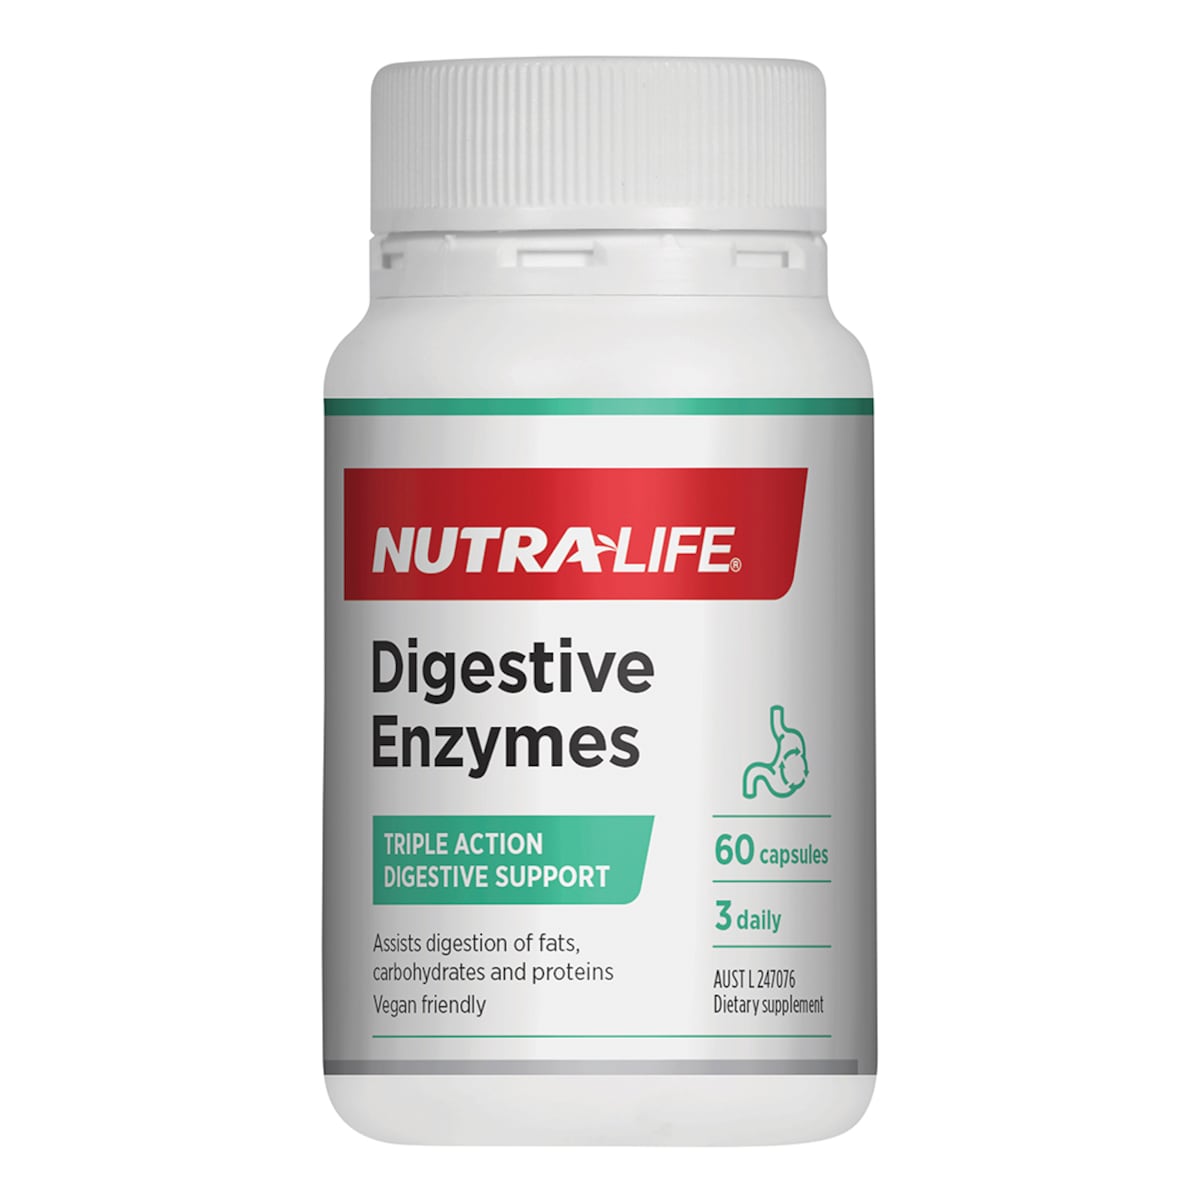 Nutra-Life Digestive Enzymes 60 Capsules Australia